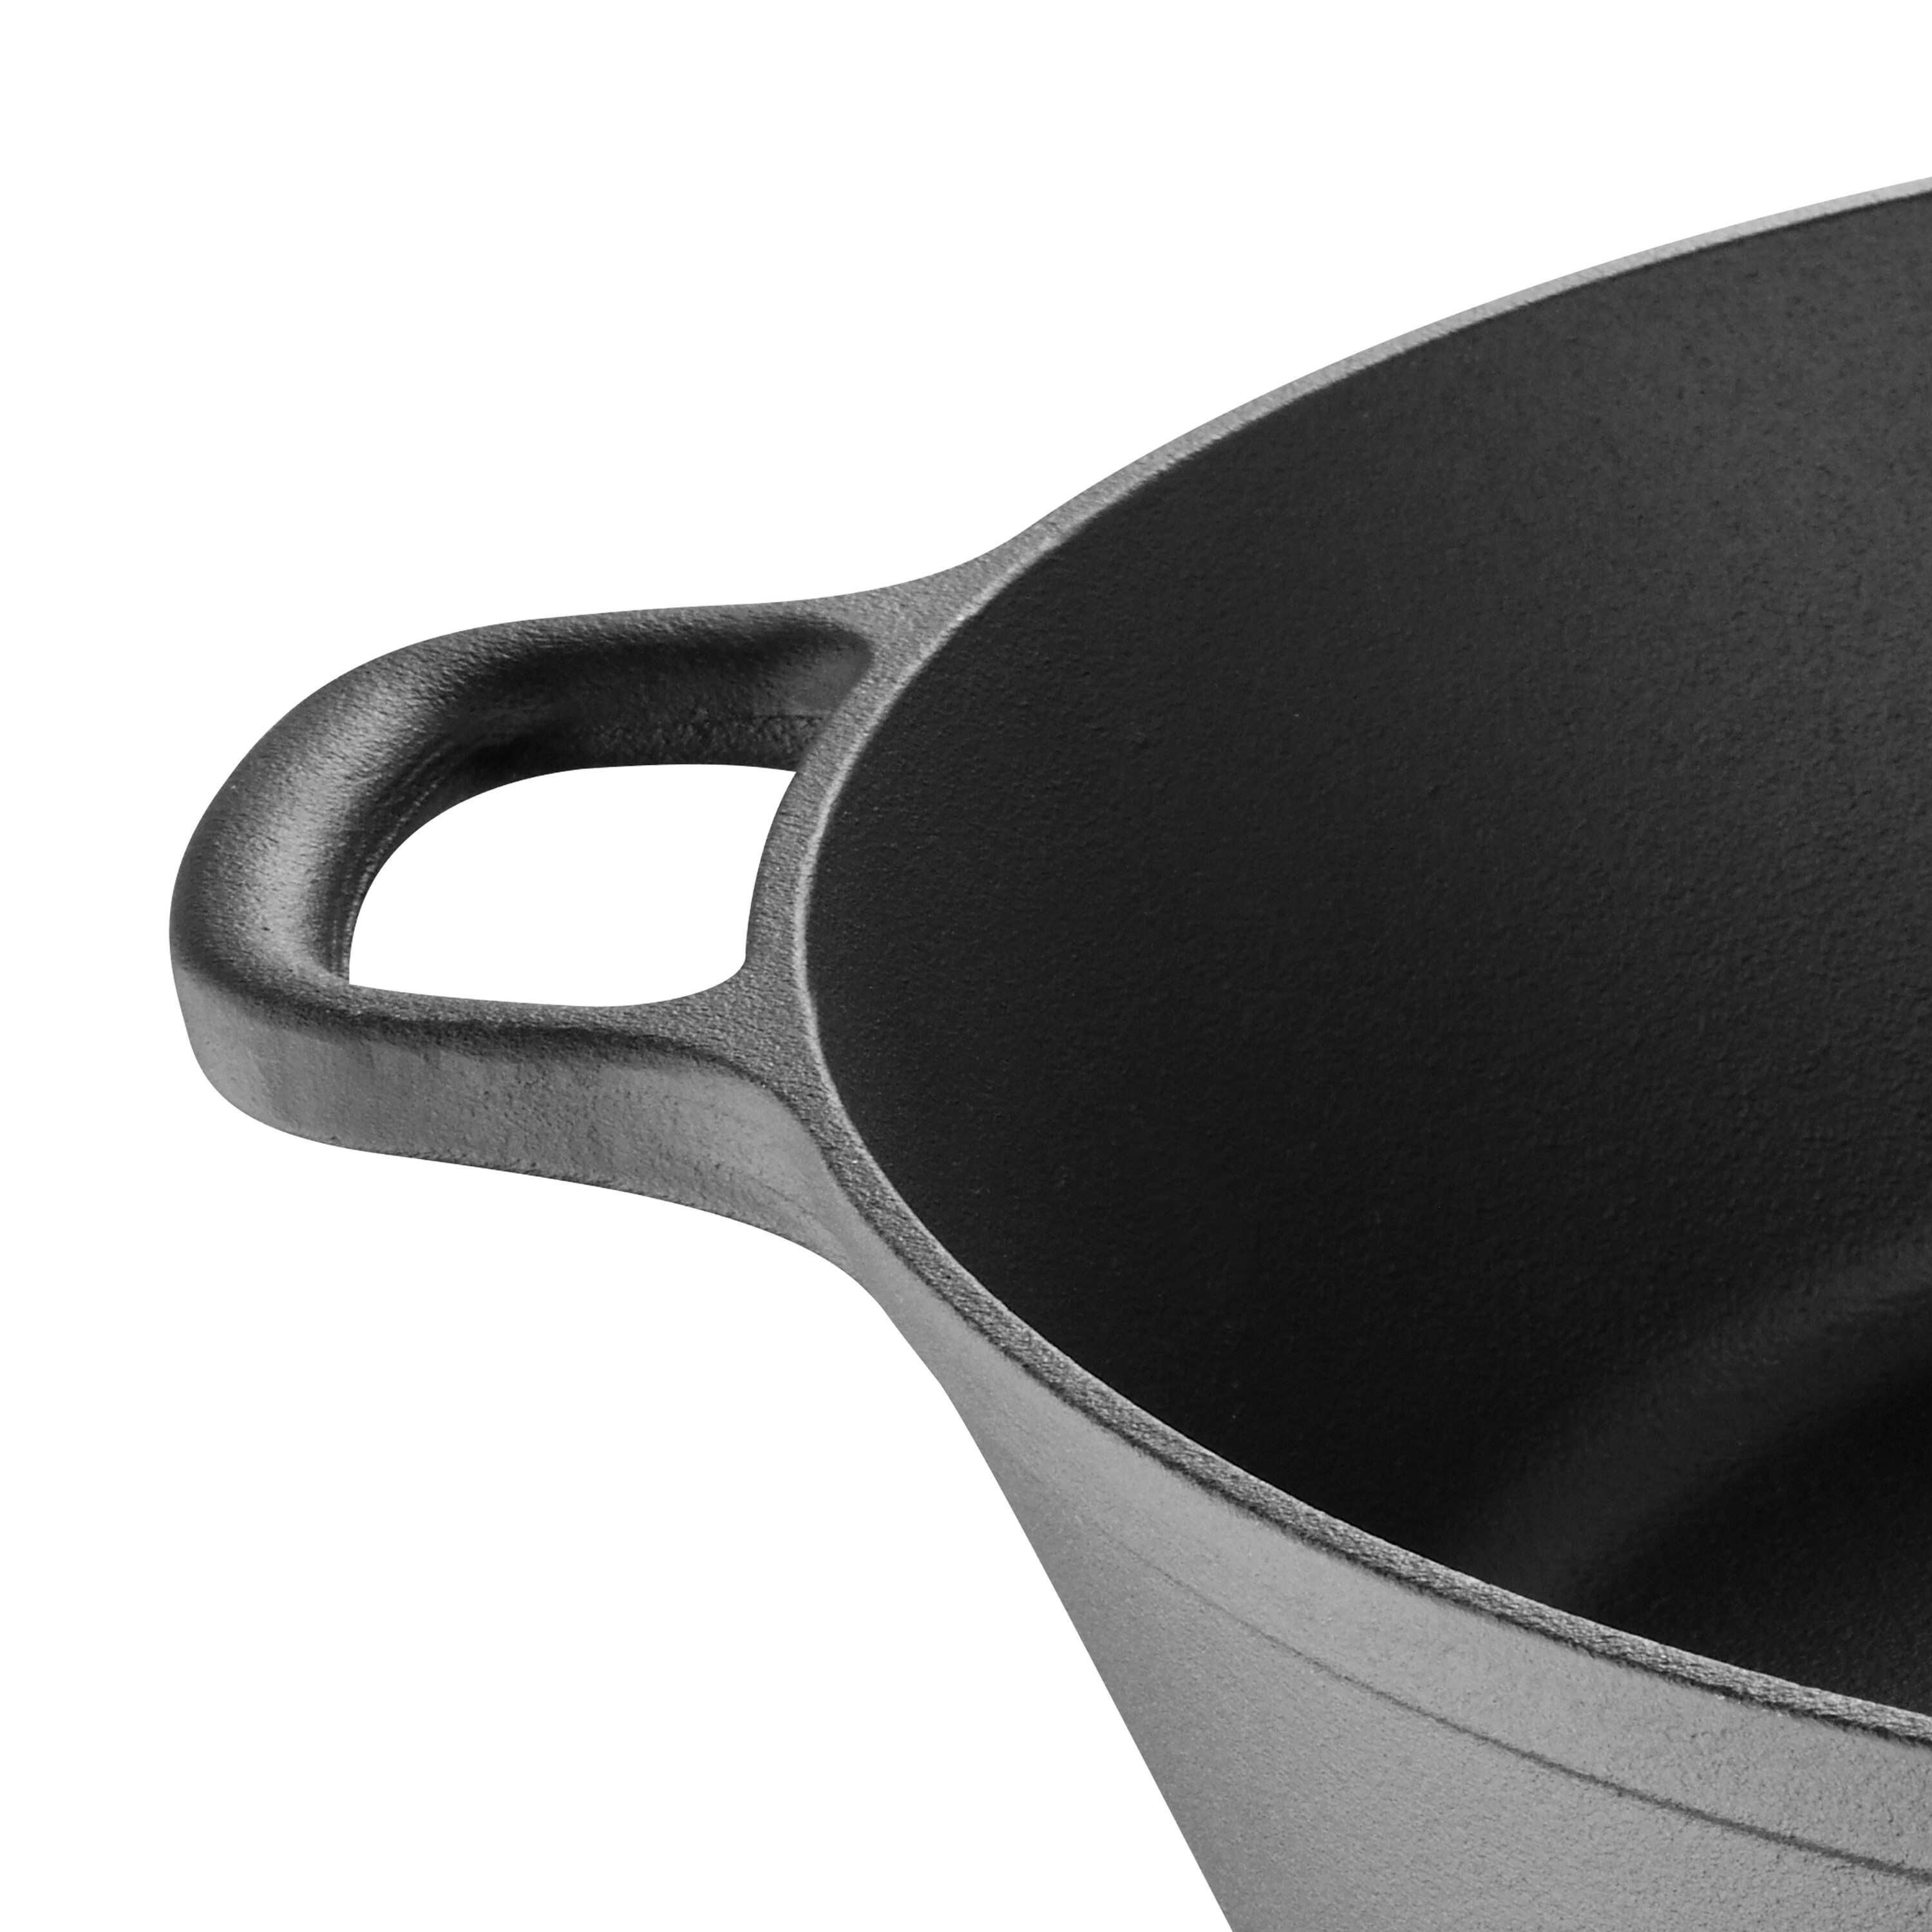 https://ak1.ostkcdn.com/images/products/is/images/direct/e267a94d1f62506a3f22deaa48fda2be43a984cc/Bergner-MPUS16304BLK-14-Inch-Family-Pot-with-Glass-Lid.jpg